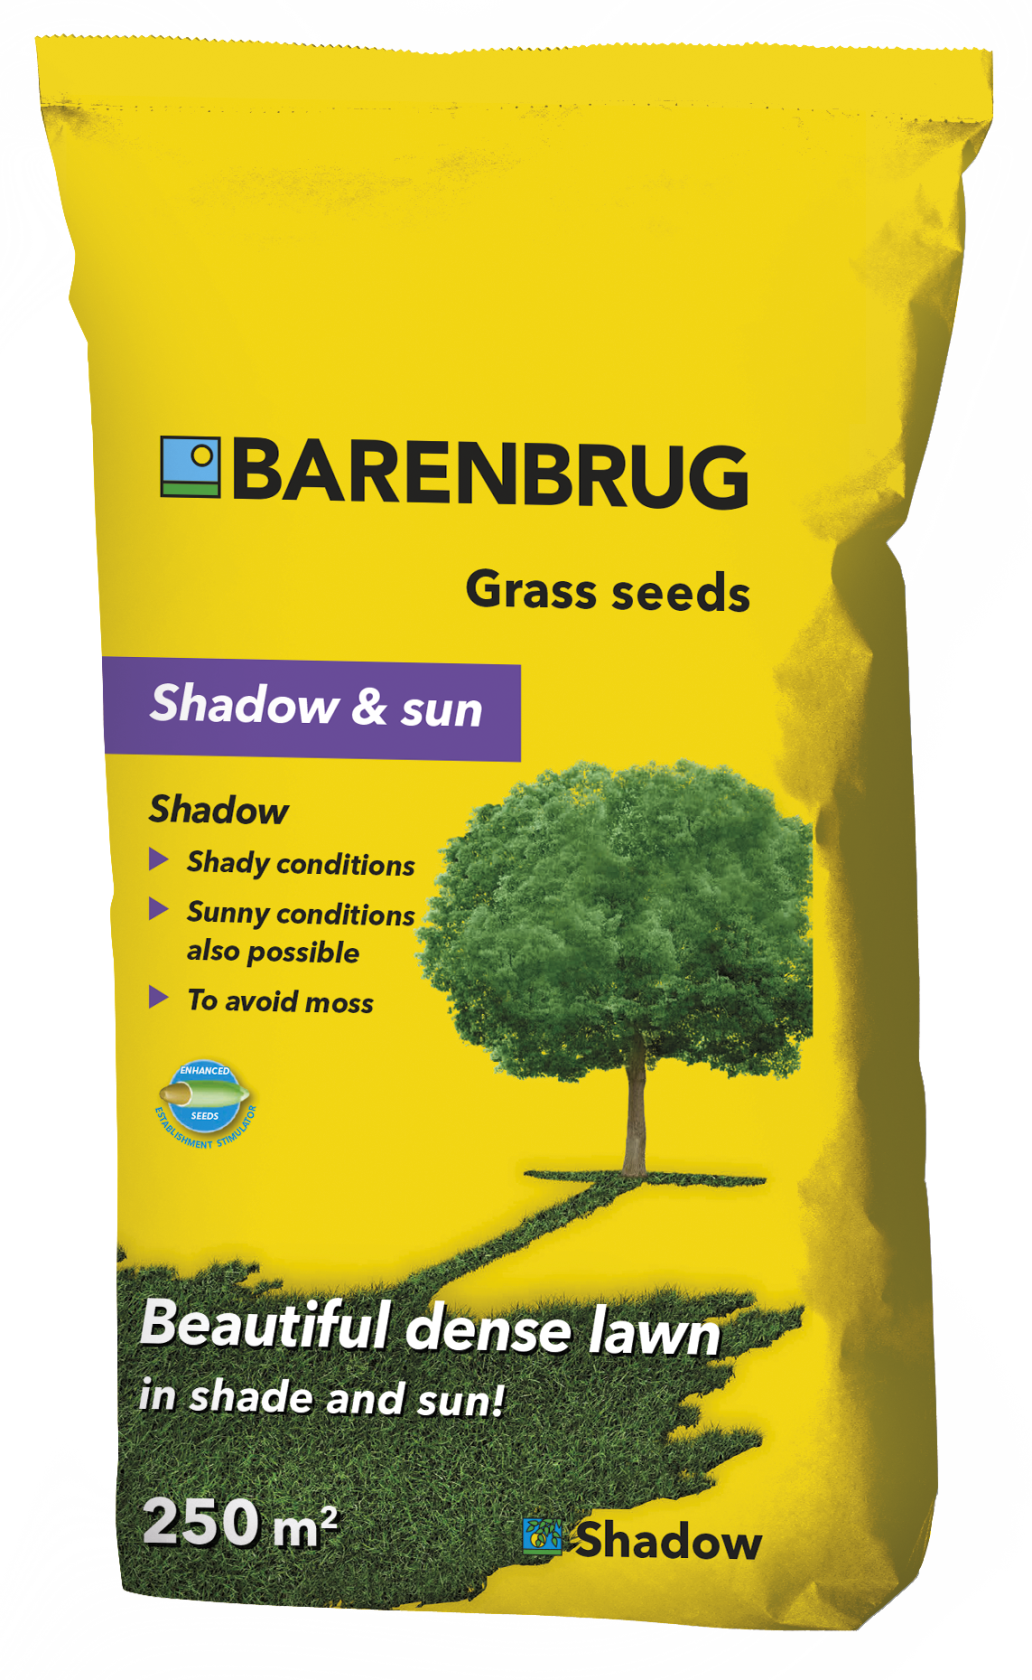 Barenbrug grass seed Shadow coated - for a full shade lawn - 5kg up to 250m²